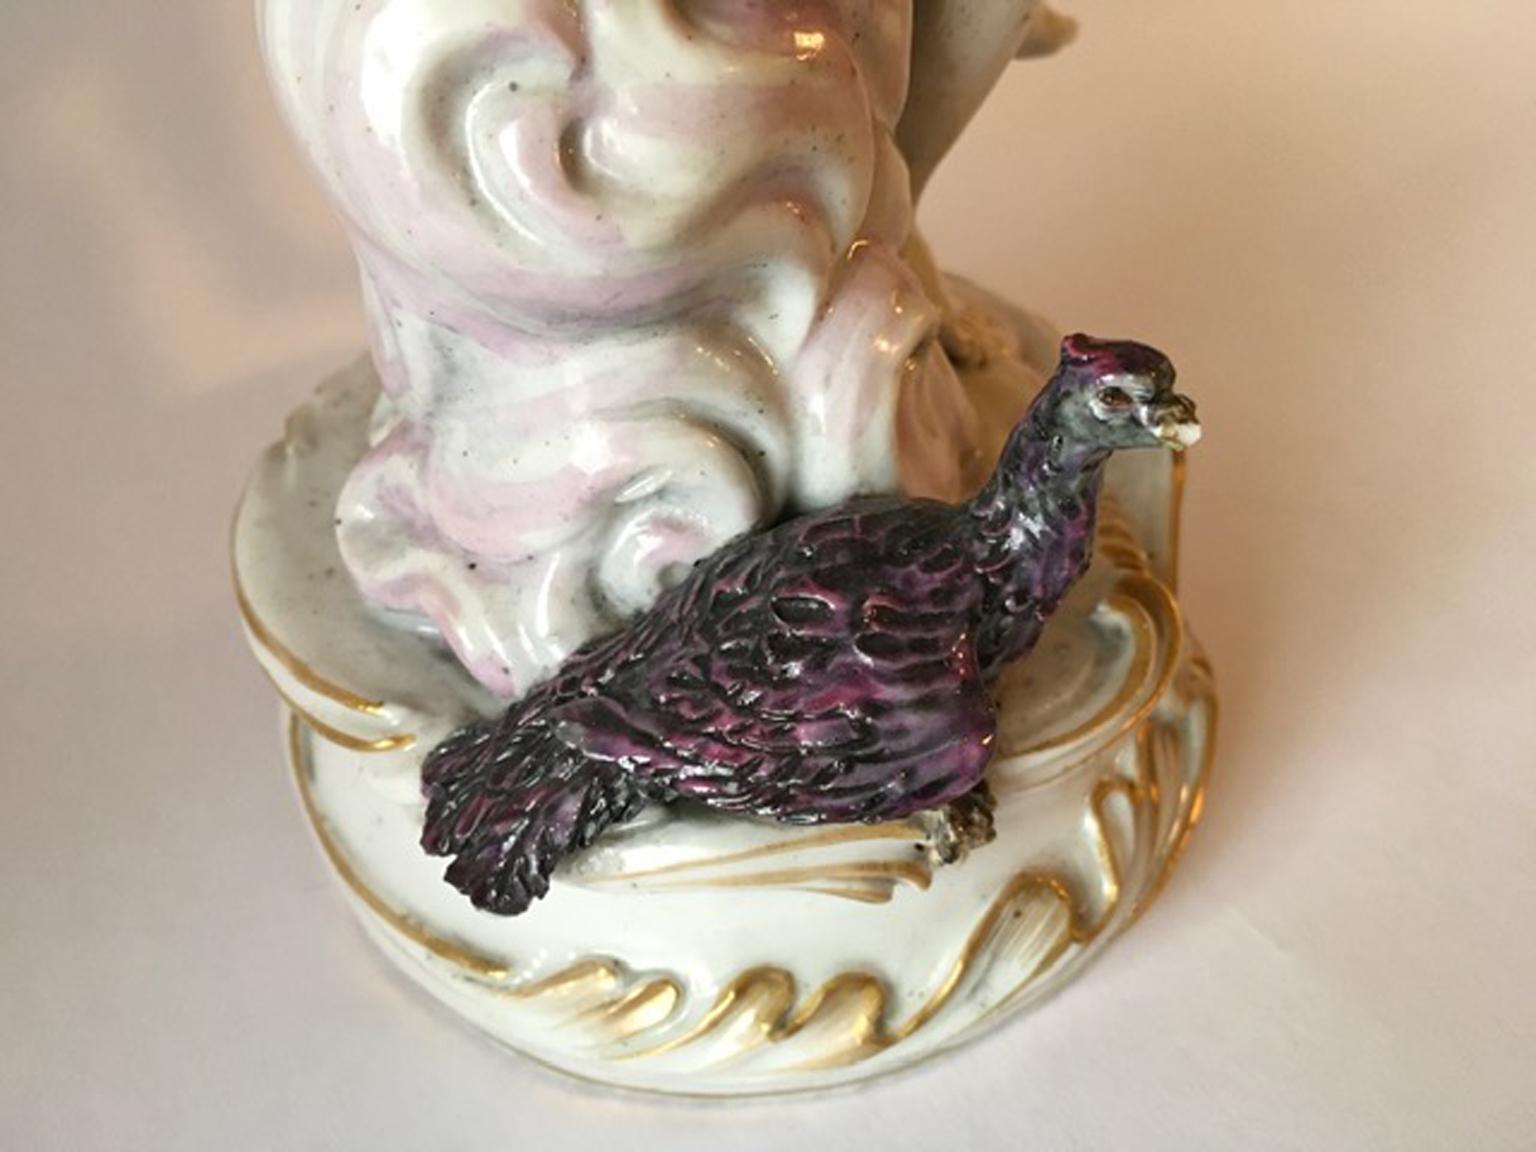 Europe 18th Century Attribuited to Meissen Porcelain Giove Figurine For Sale 5